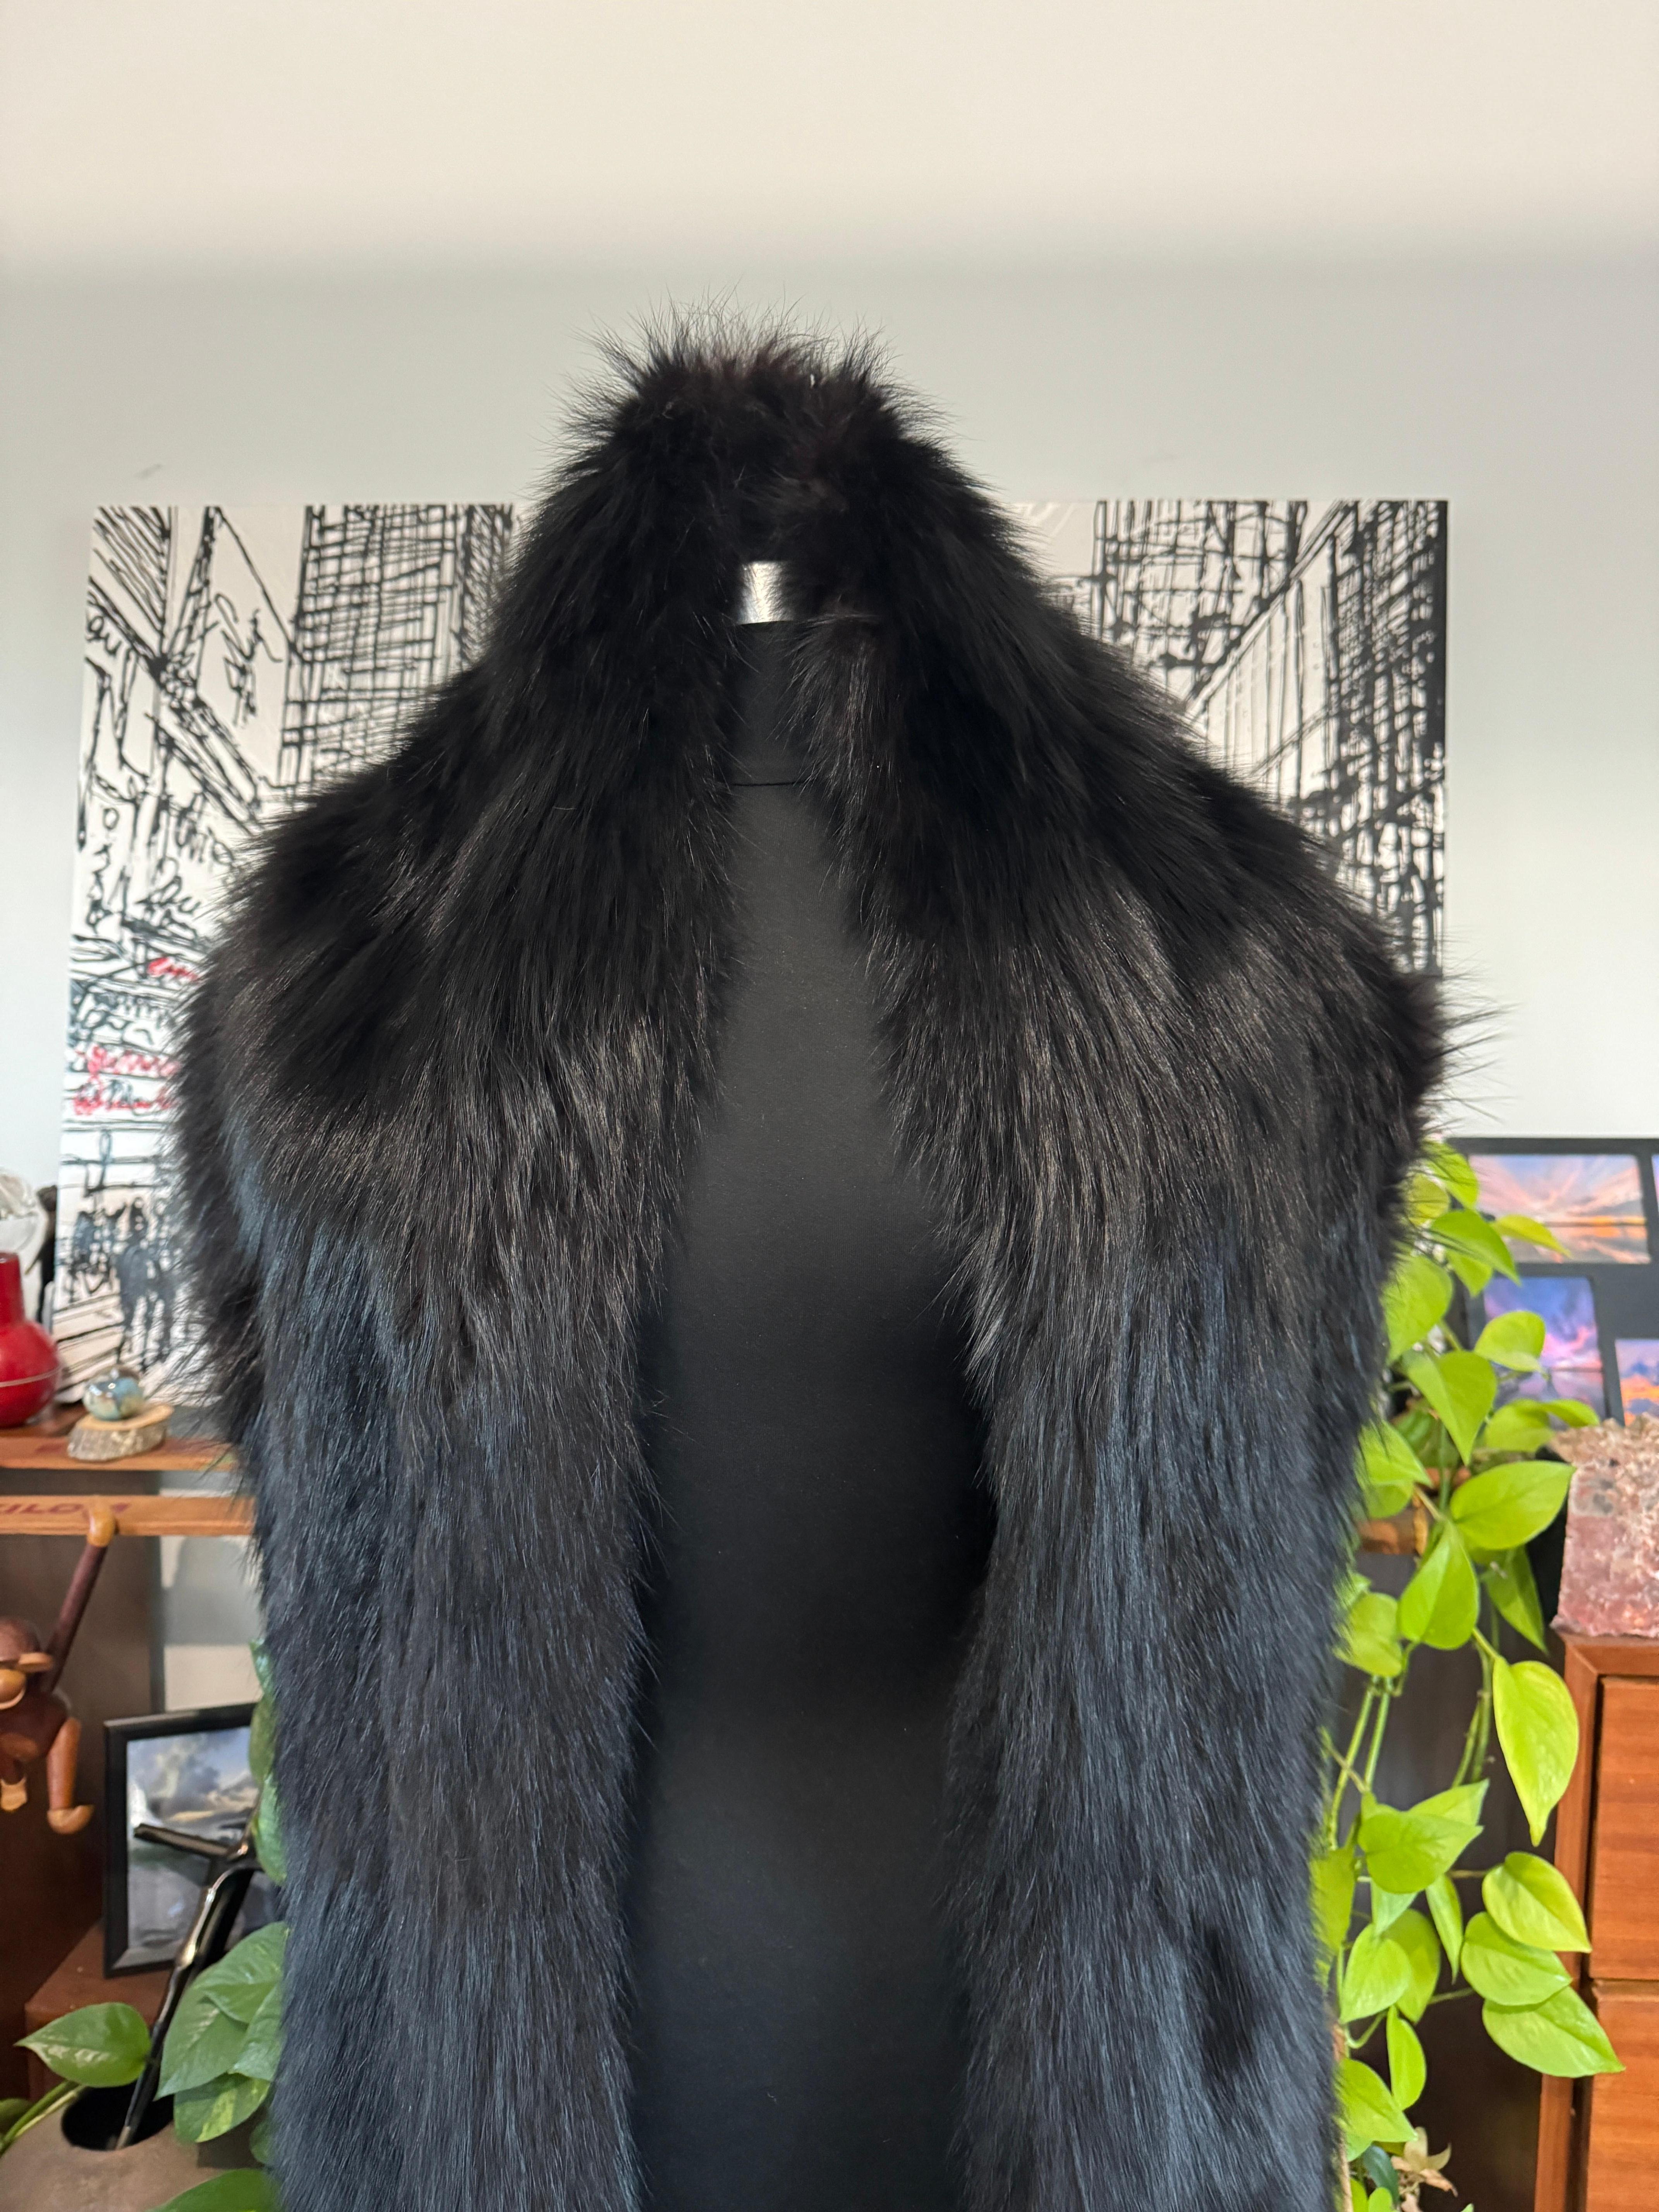 Long luscious Black Fox Wrap. Measuring 88 inches long x 11 inches at the widest. Versatile in style, wearing over a couture gown or over a jacket and jeans. Fur is supple.  We have been selling on this platform since 2013 so be sure to check our